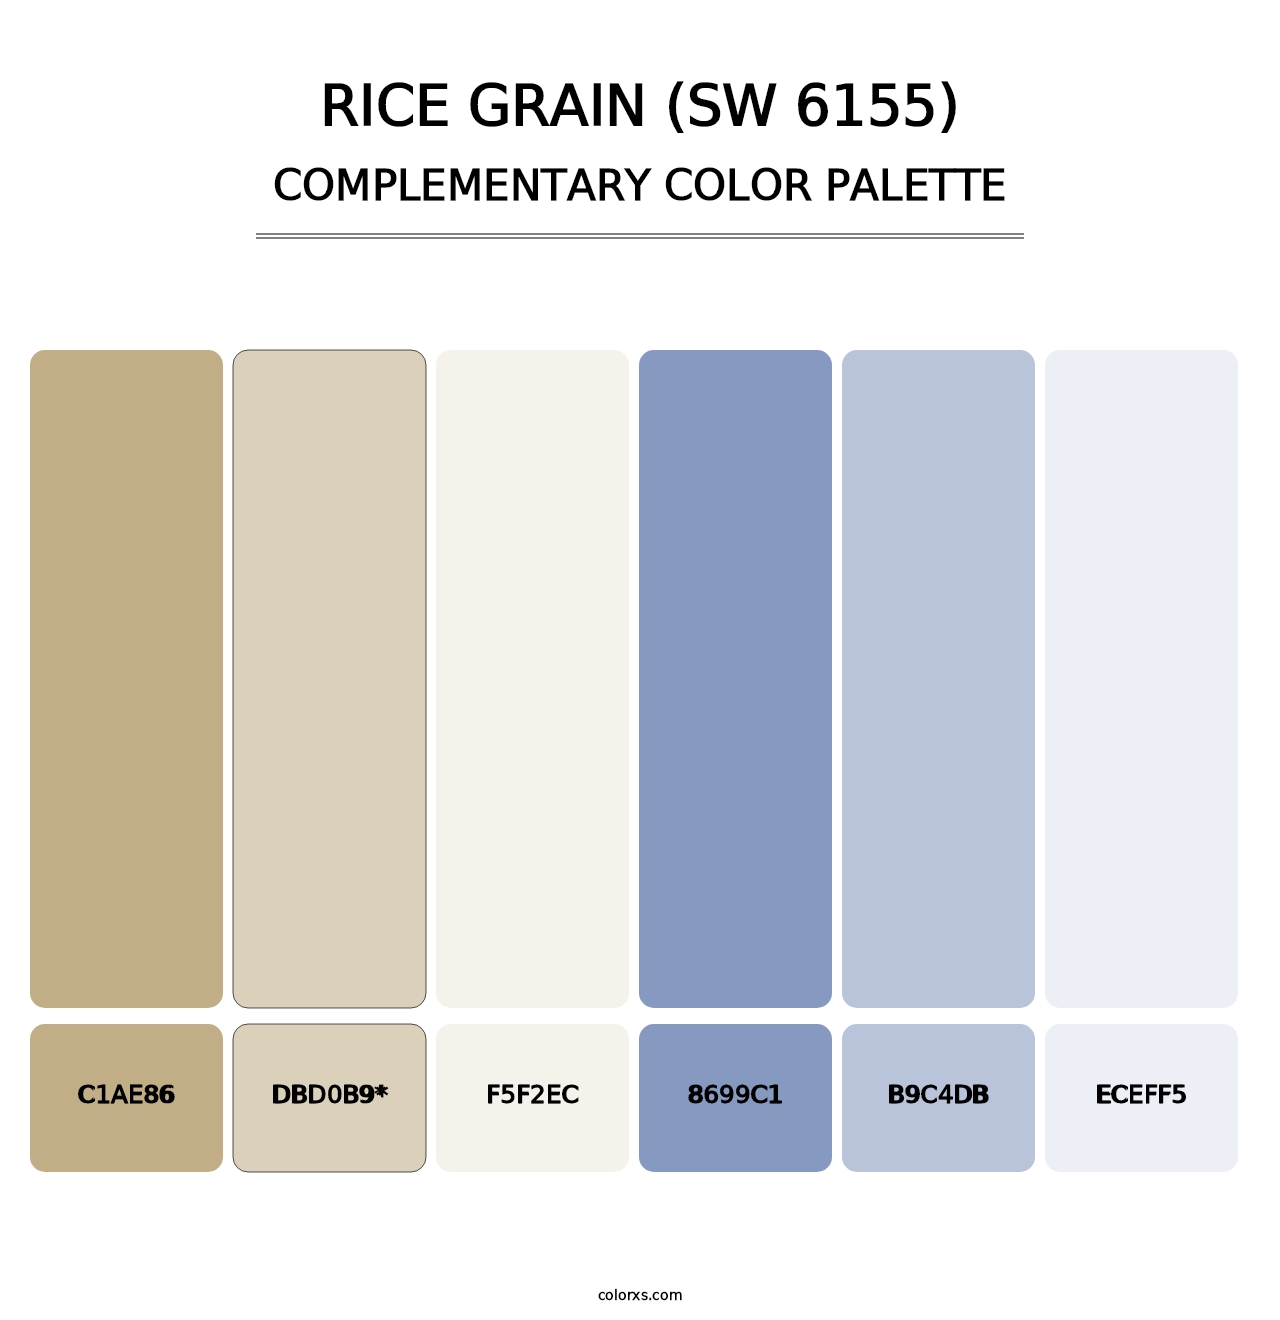 Rice Grain (SW 6155) - Complementary Color Palette